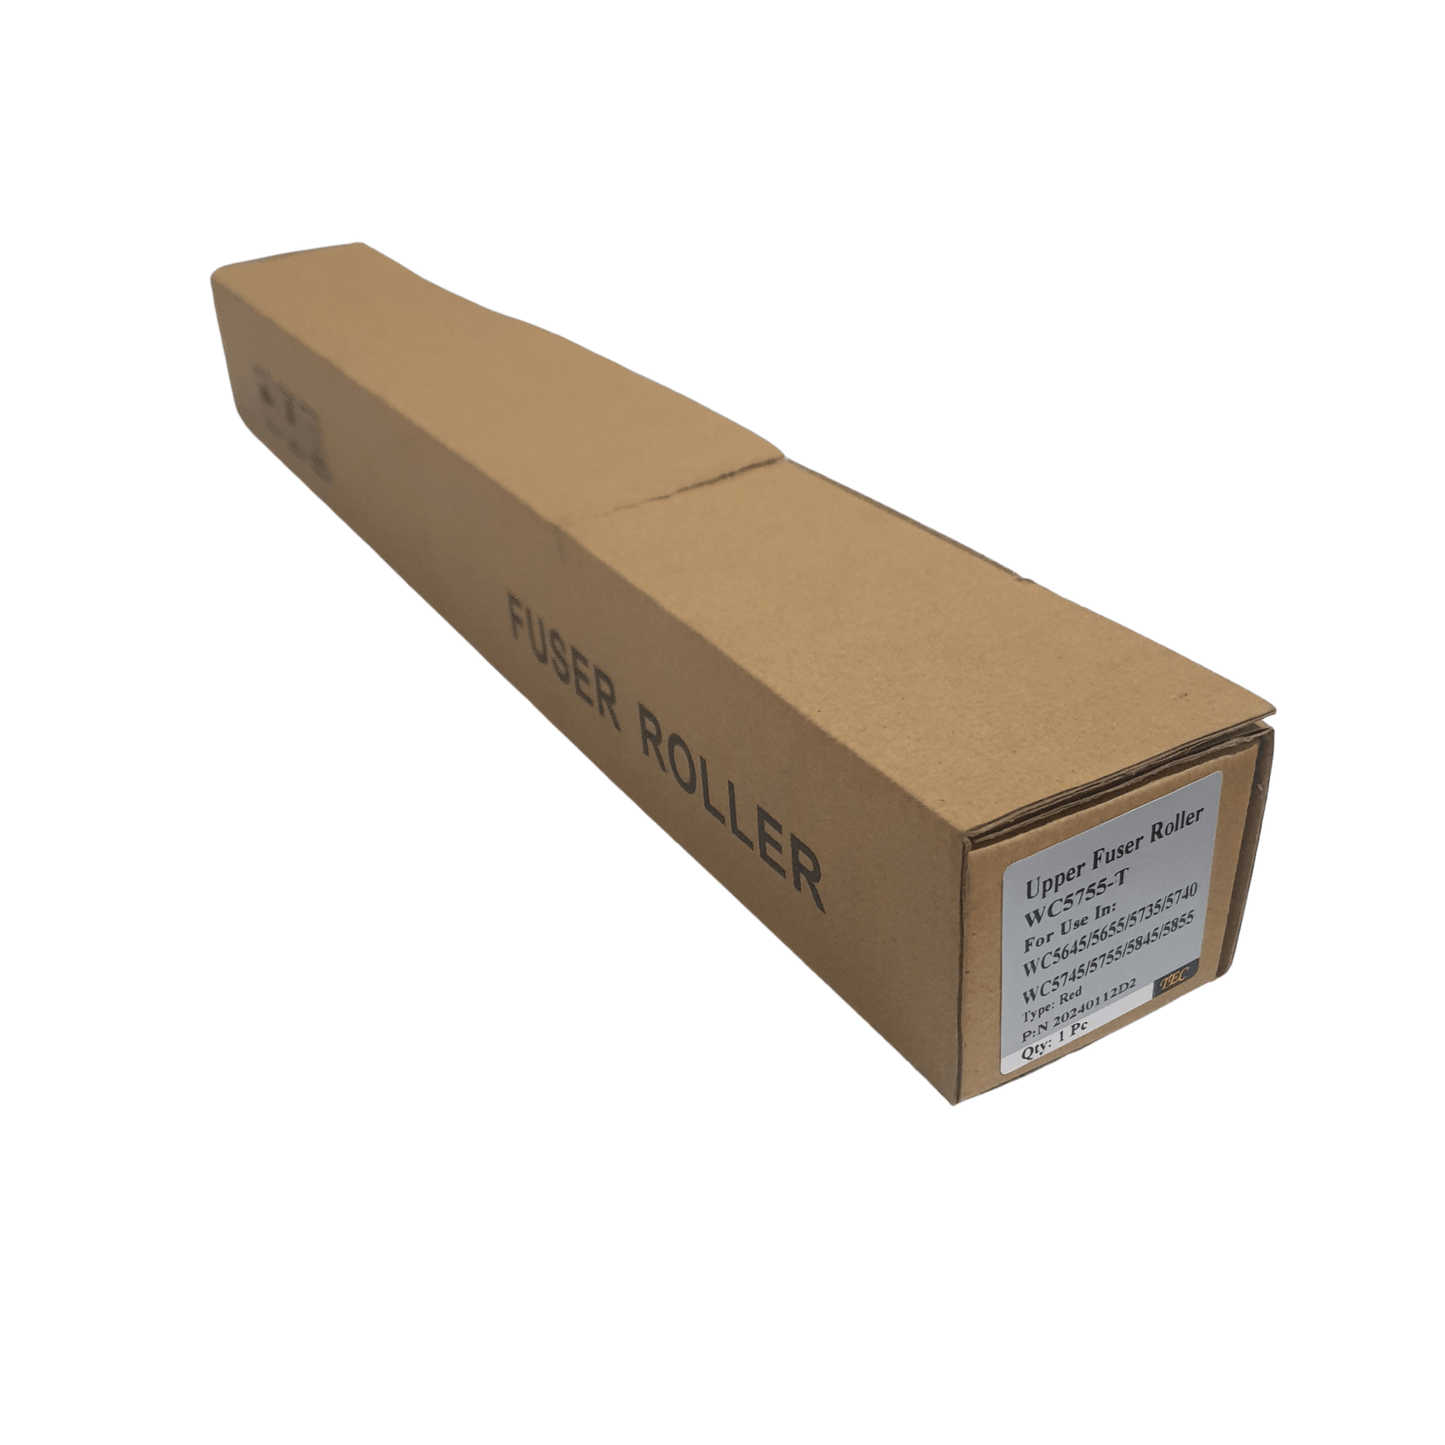 Upper Roller Xerox WC 5845/55 A Quality - 𝐏𝐑𝐄𝐌𝐈𝐄𝐑 𝐓𝐑𝐀𝐃𝐄𝐑𝐒